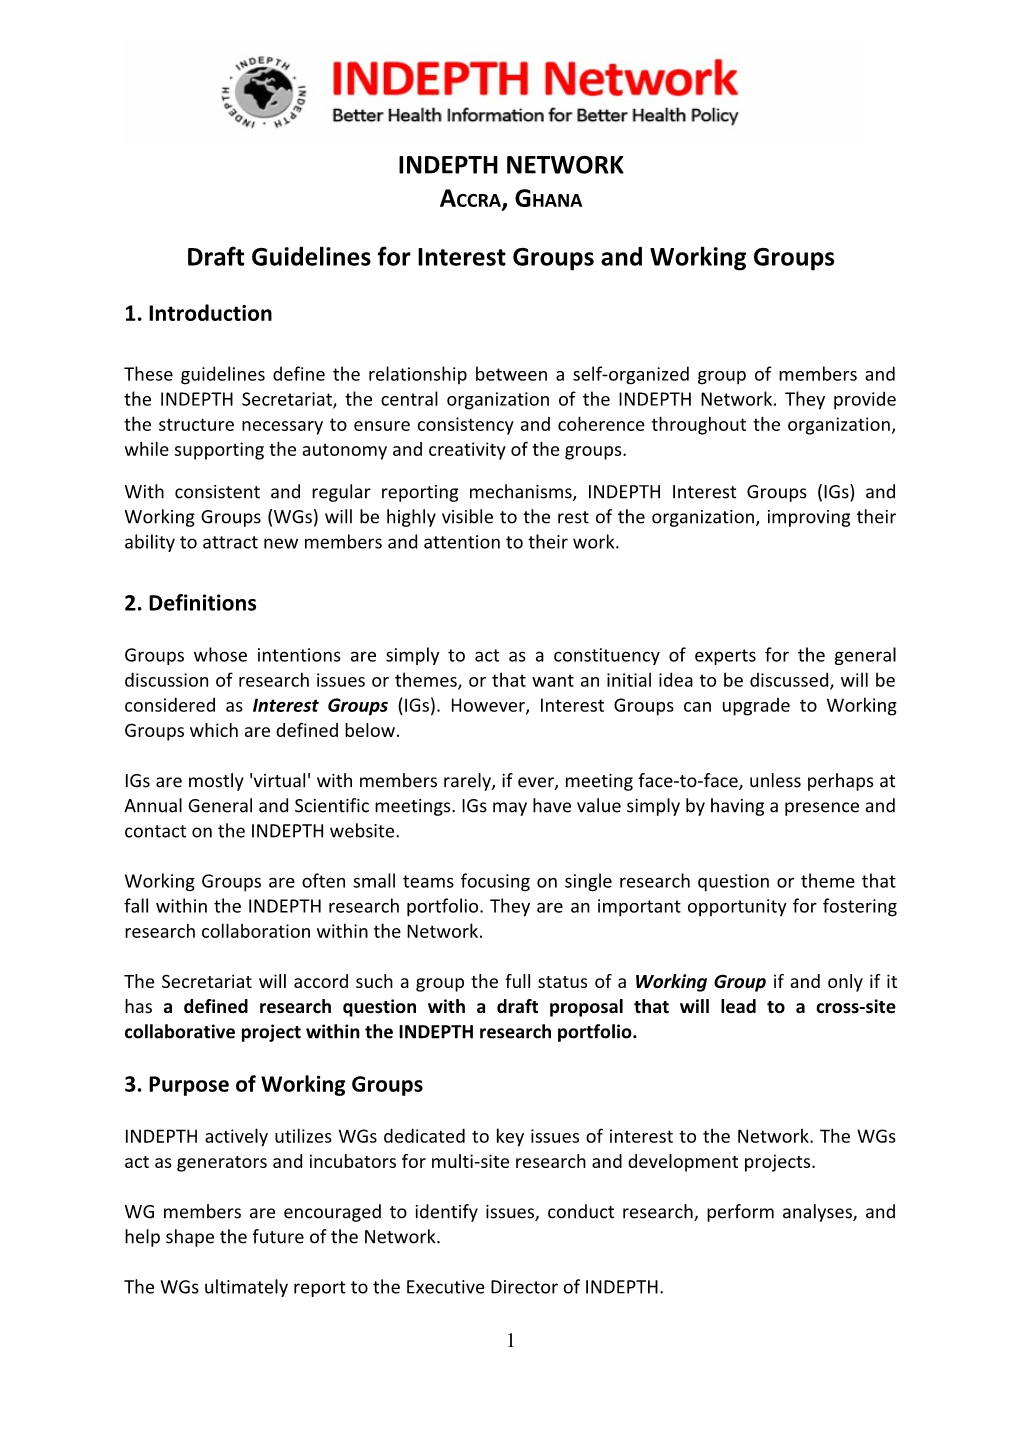 Draft Guidelines for Interest Groups and Working Groups